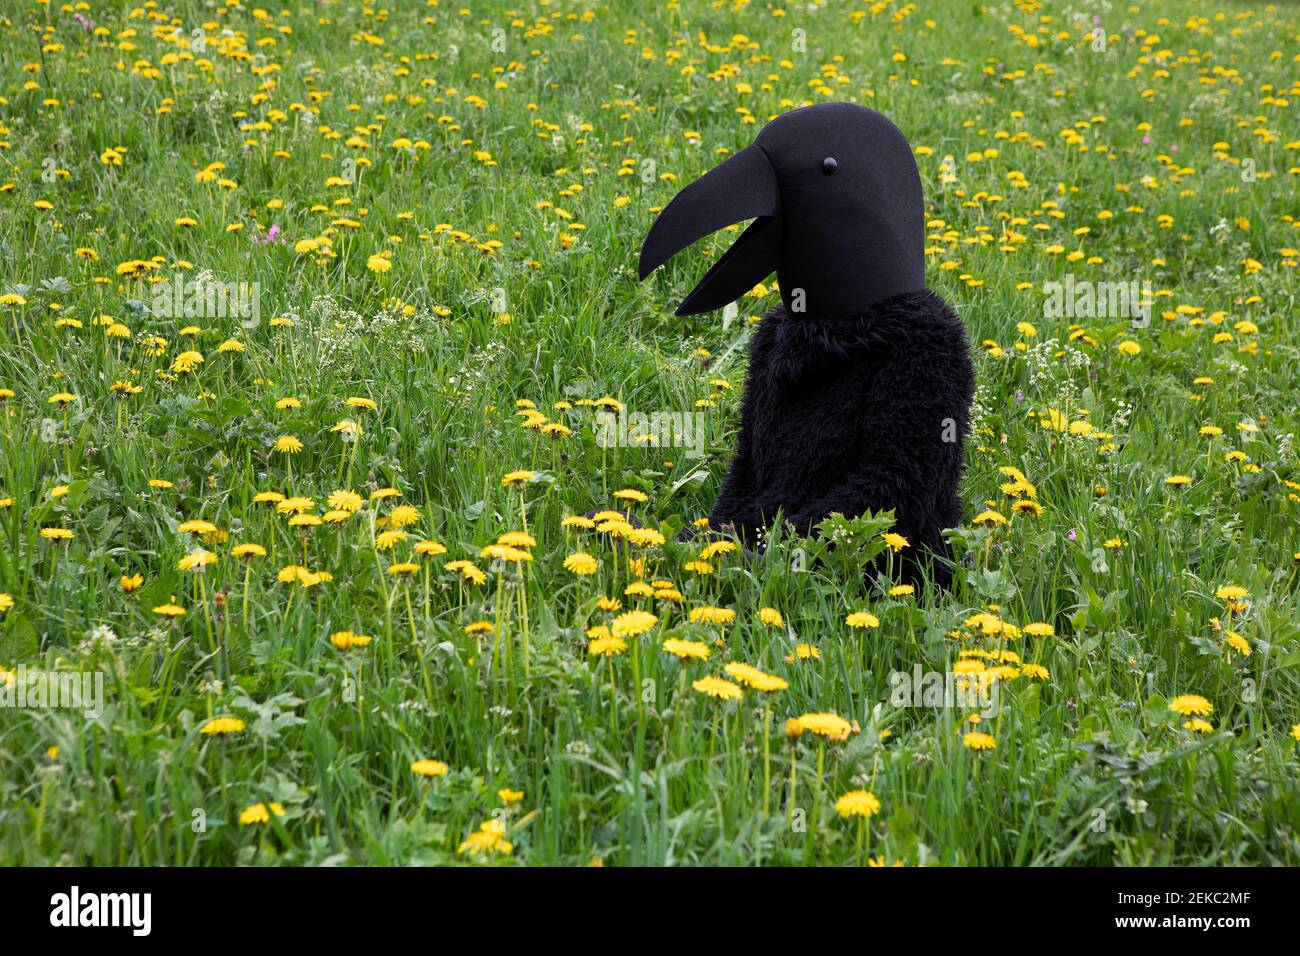 Female in crow costume looking at meadow Stock Photo